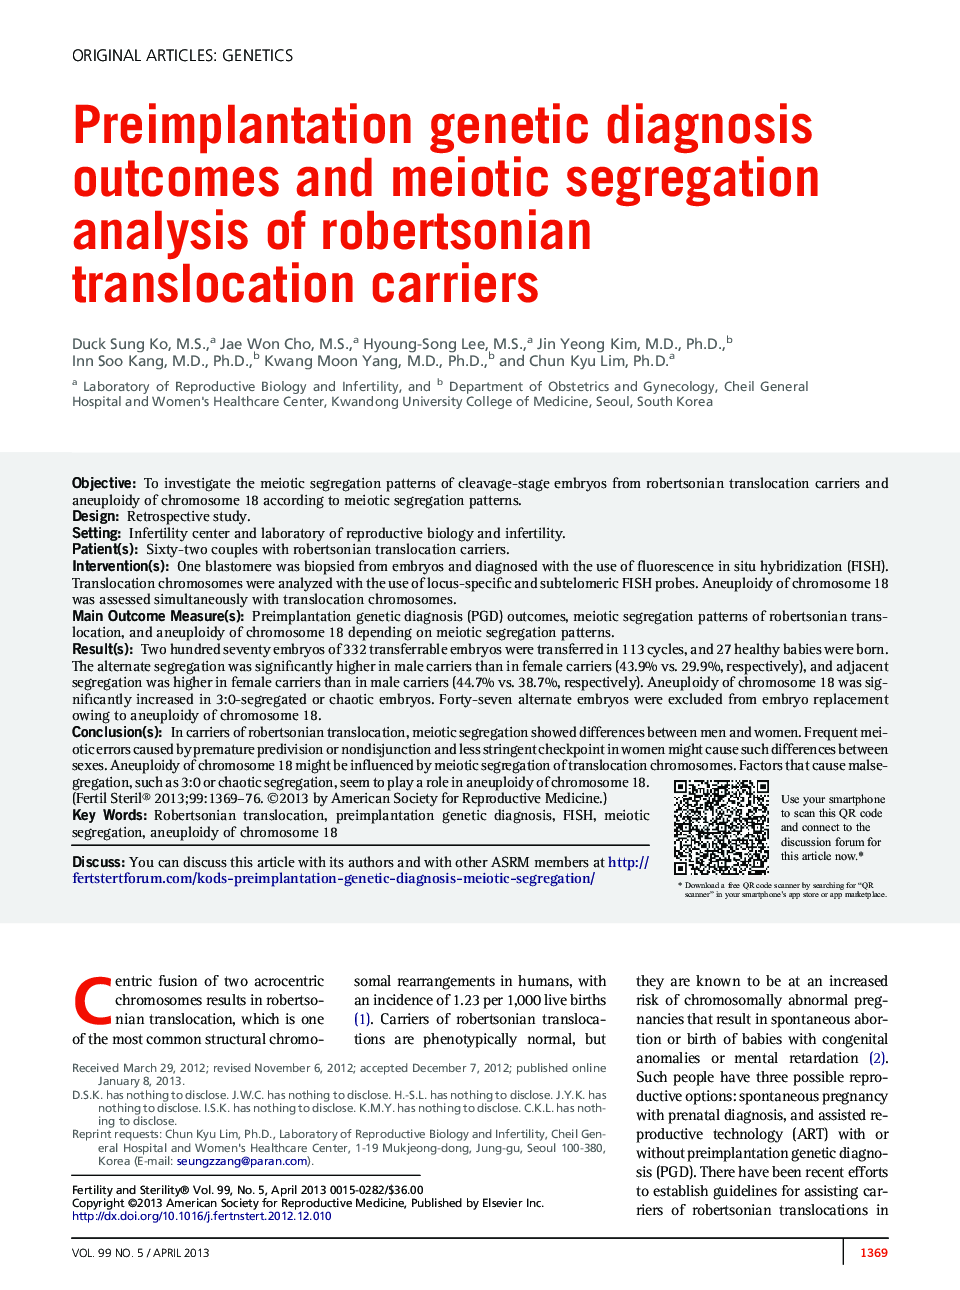 Preimplantation genetic diagnosis outcomes and meiotic segregation analysis of robertsonian translocation carriers 